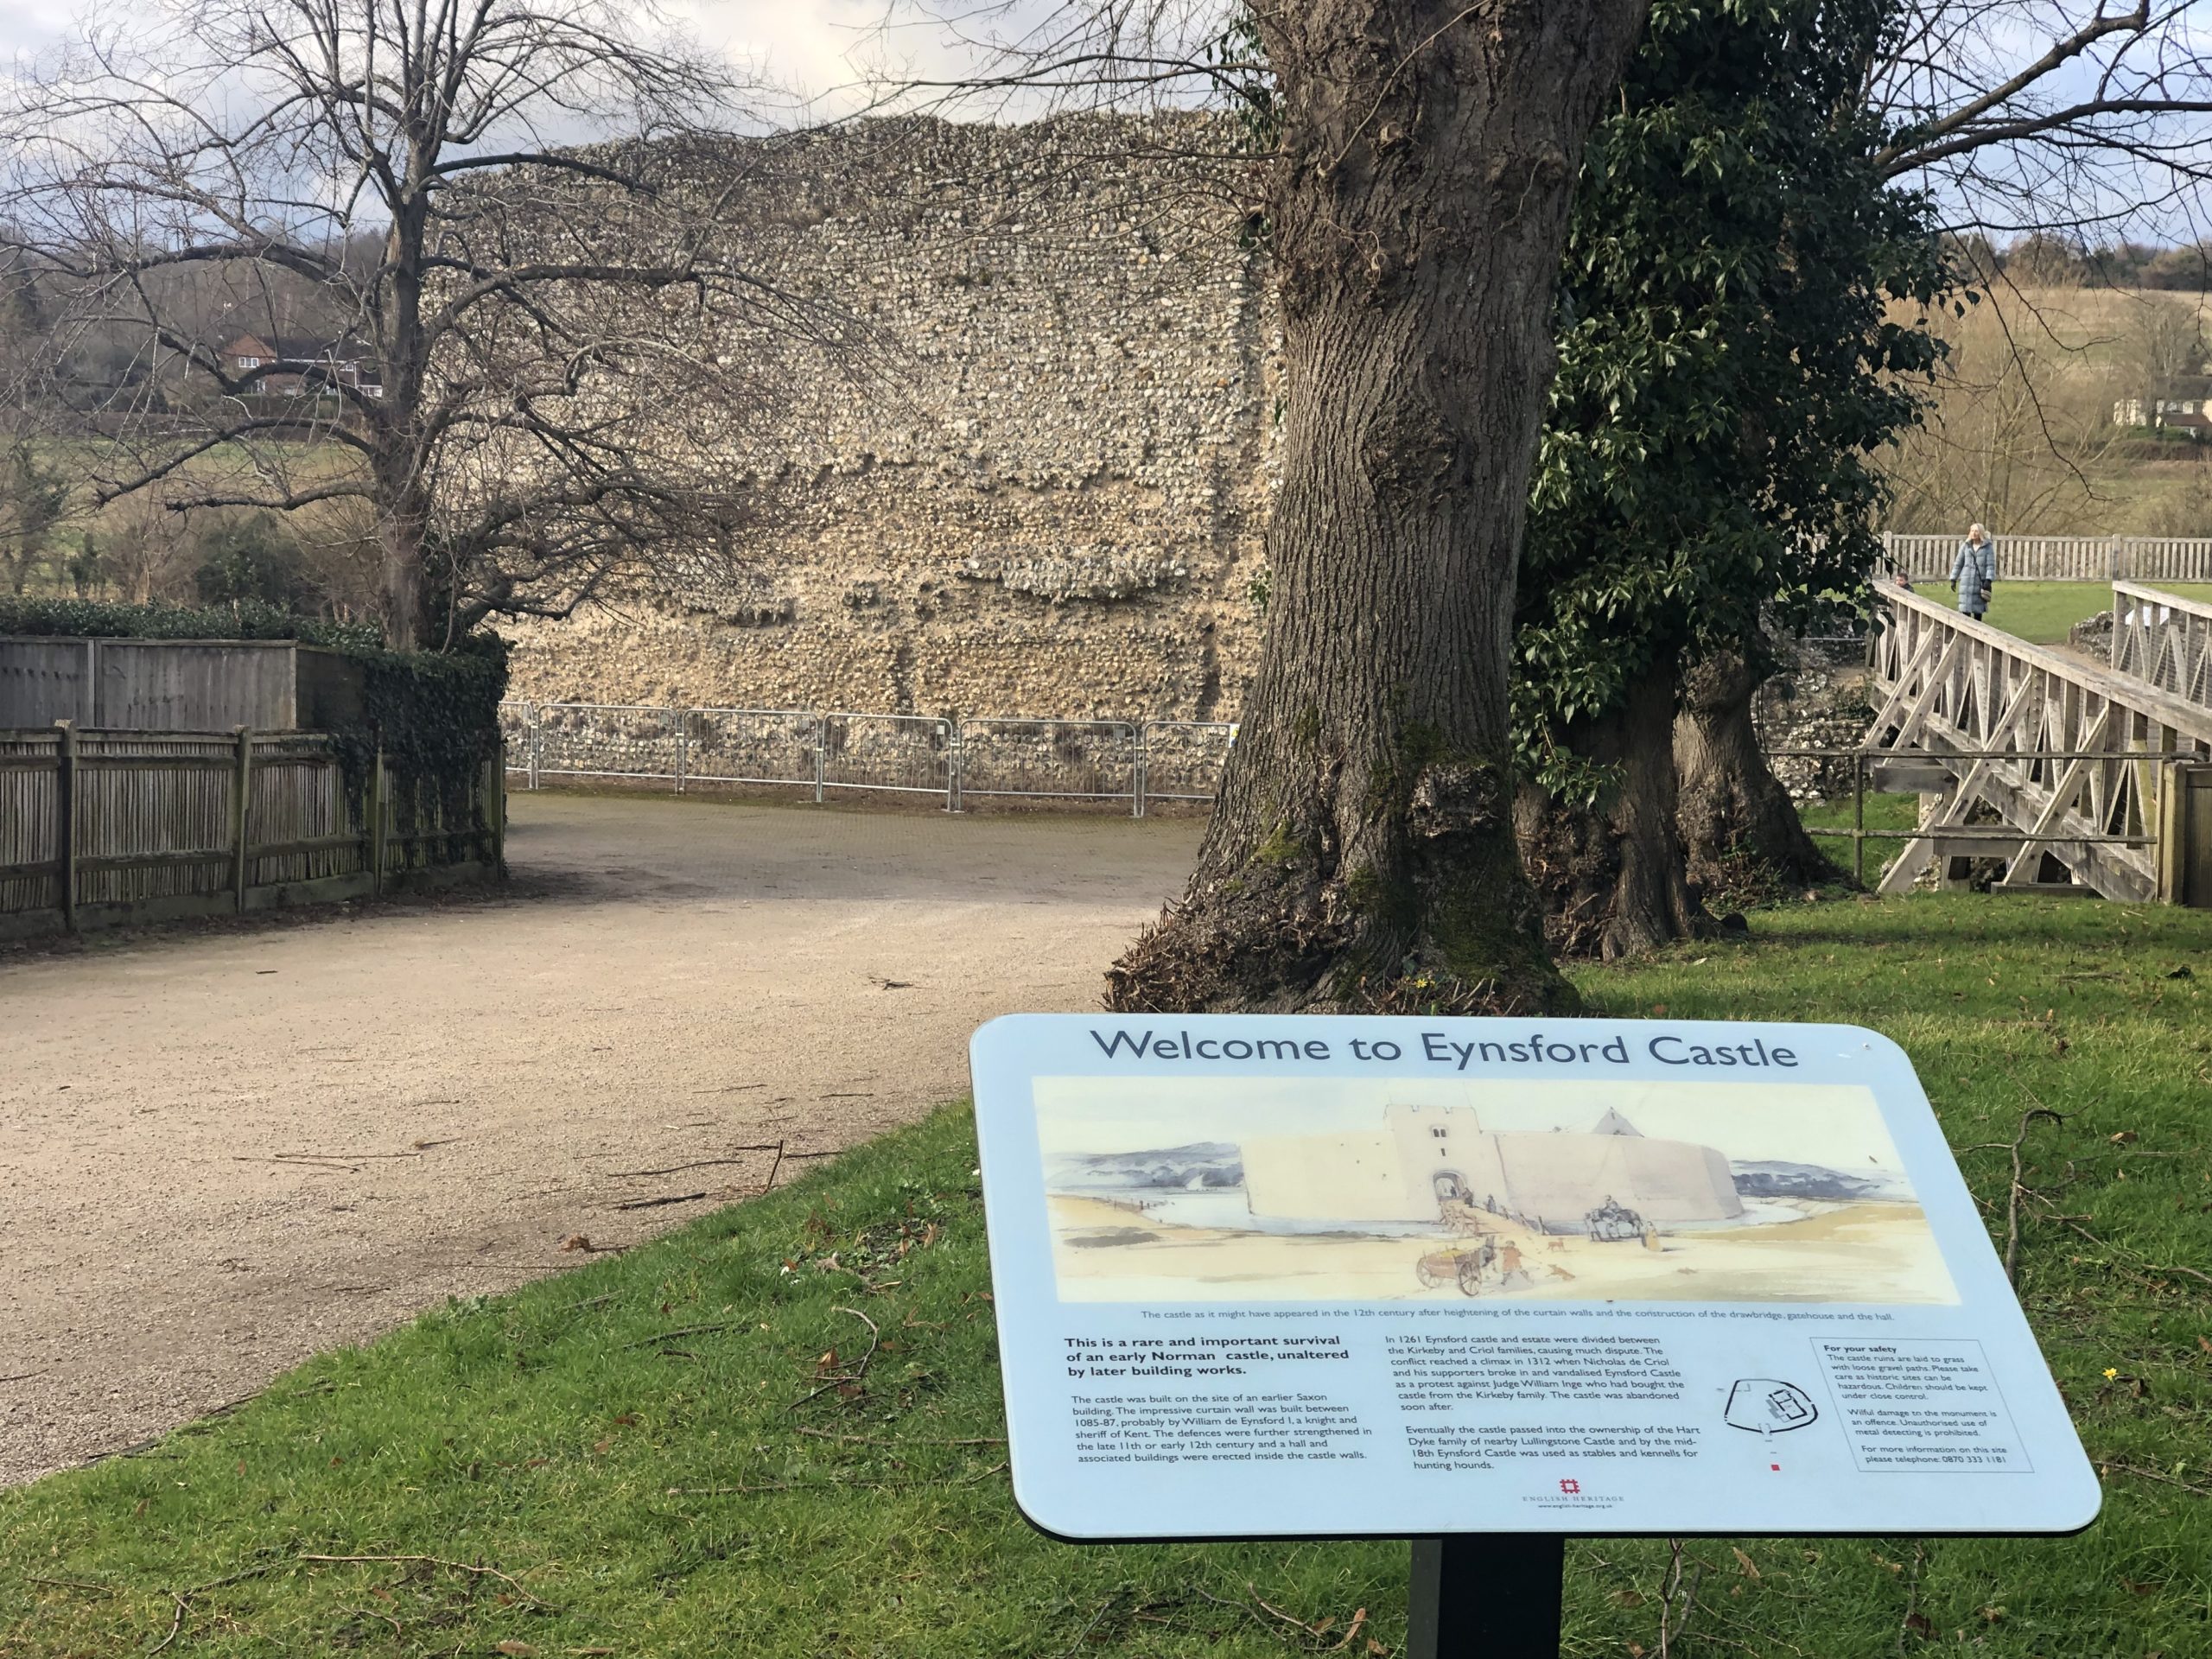 Sign saying welcome to Eynsford Castle with castle wall behind